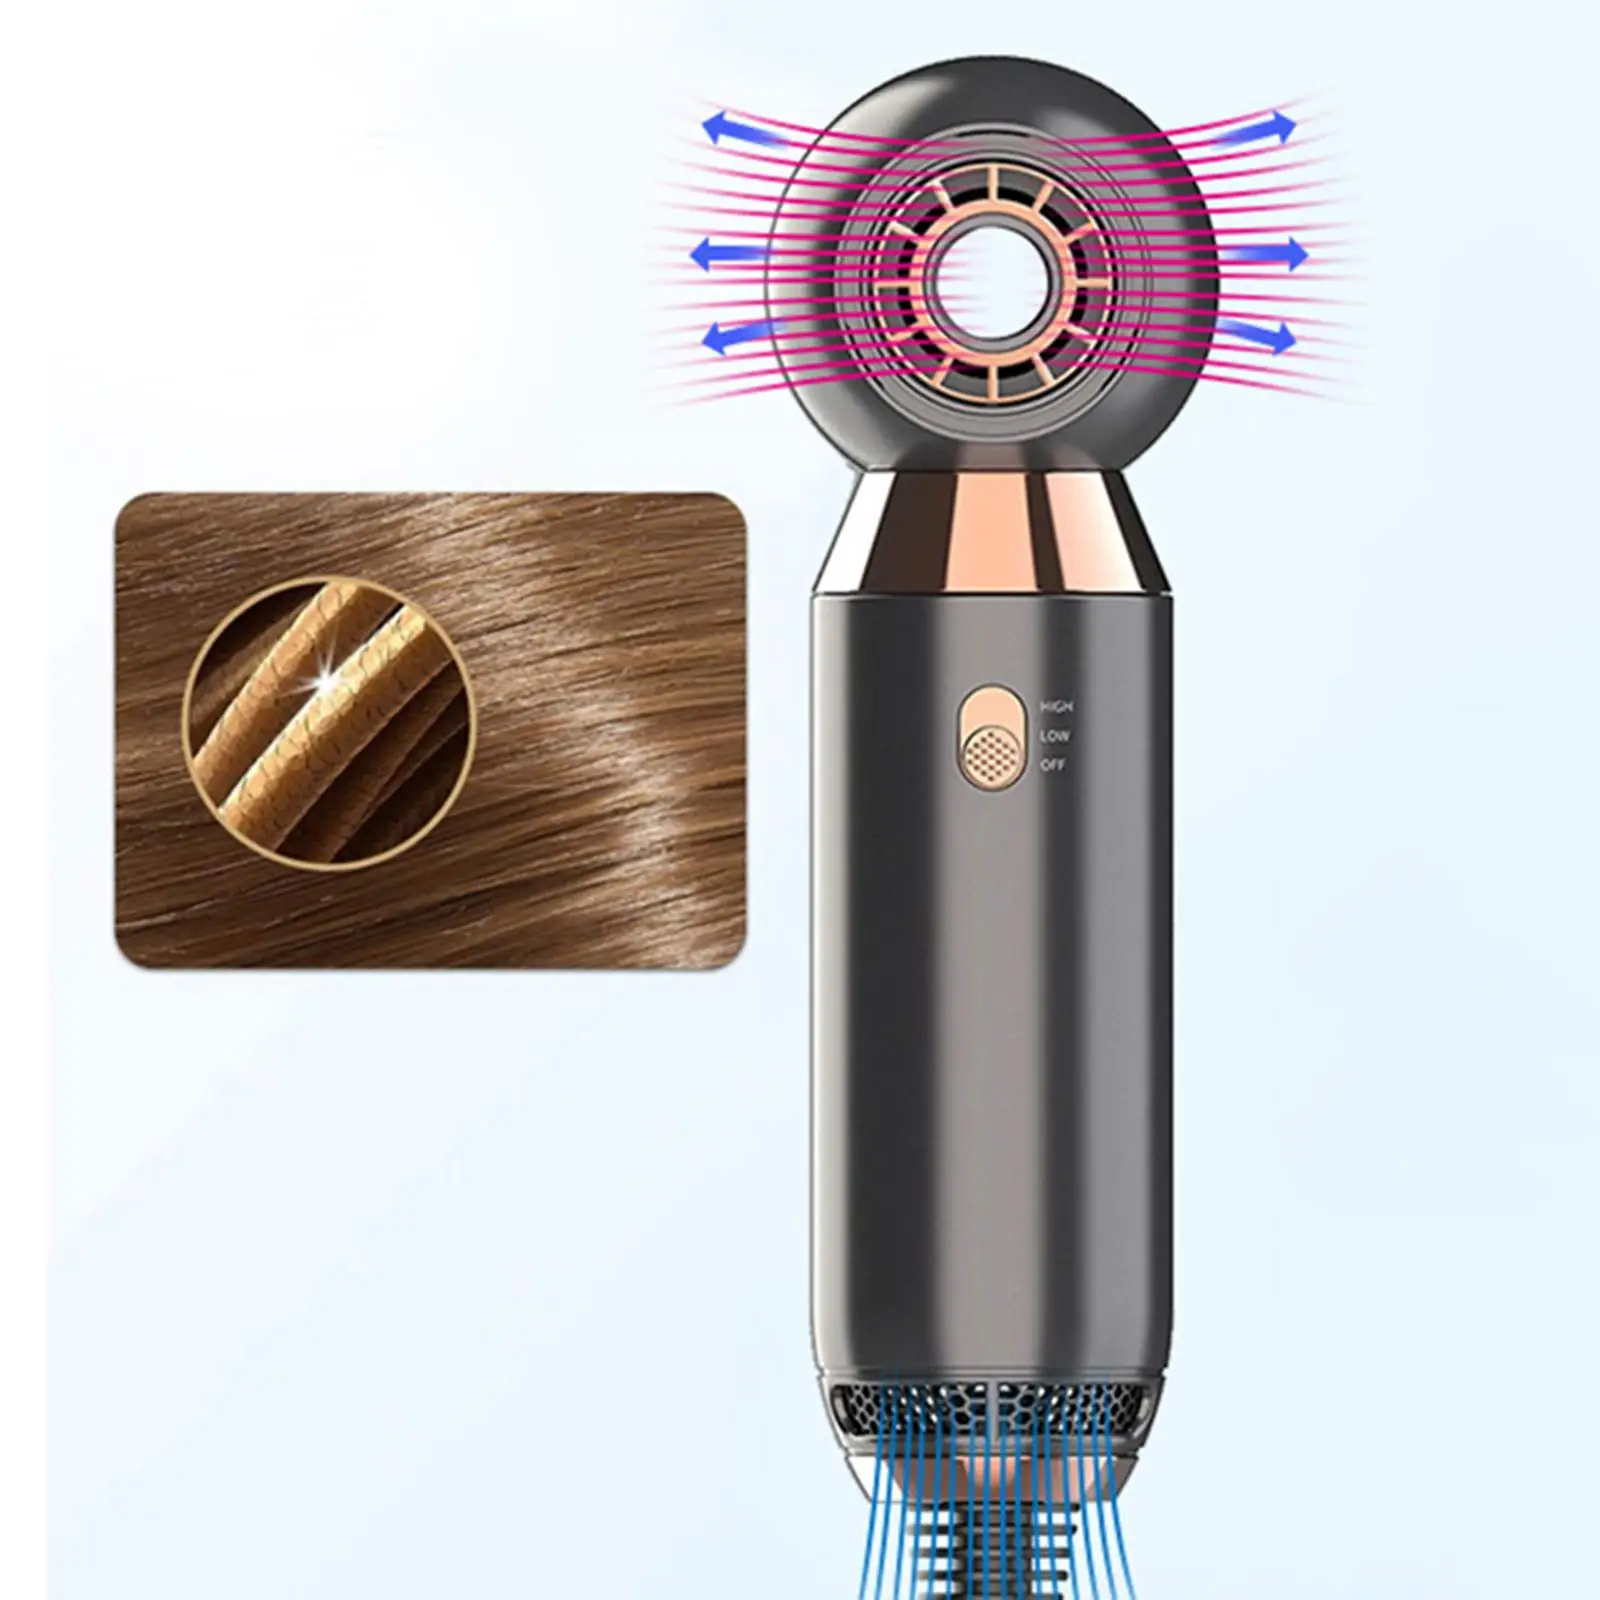 Household Hair Dryer Hammer Diffuser for No Hair Damage Curly Hair Dormitory Salon